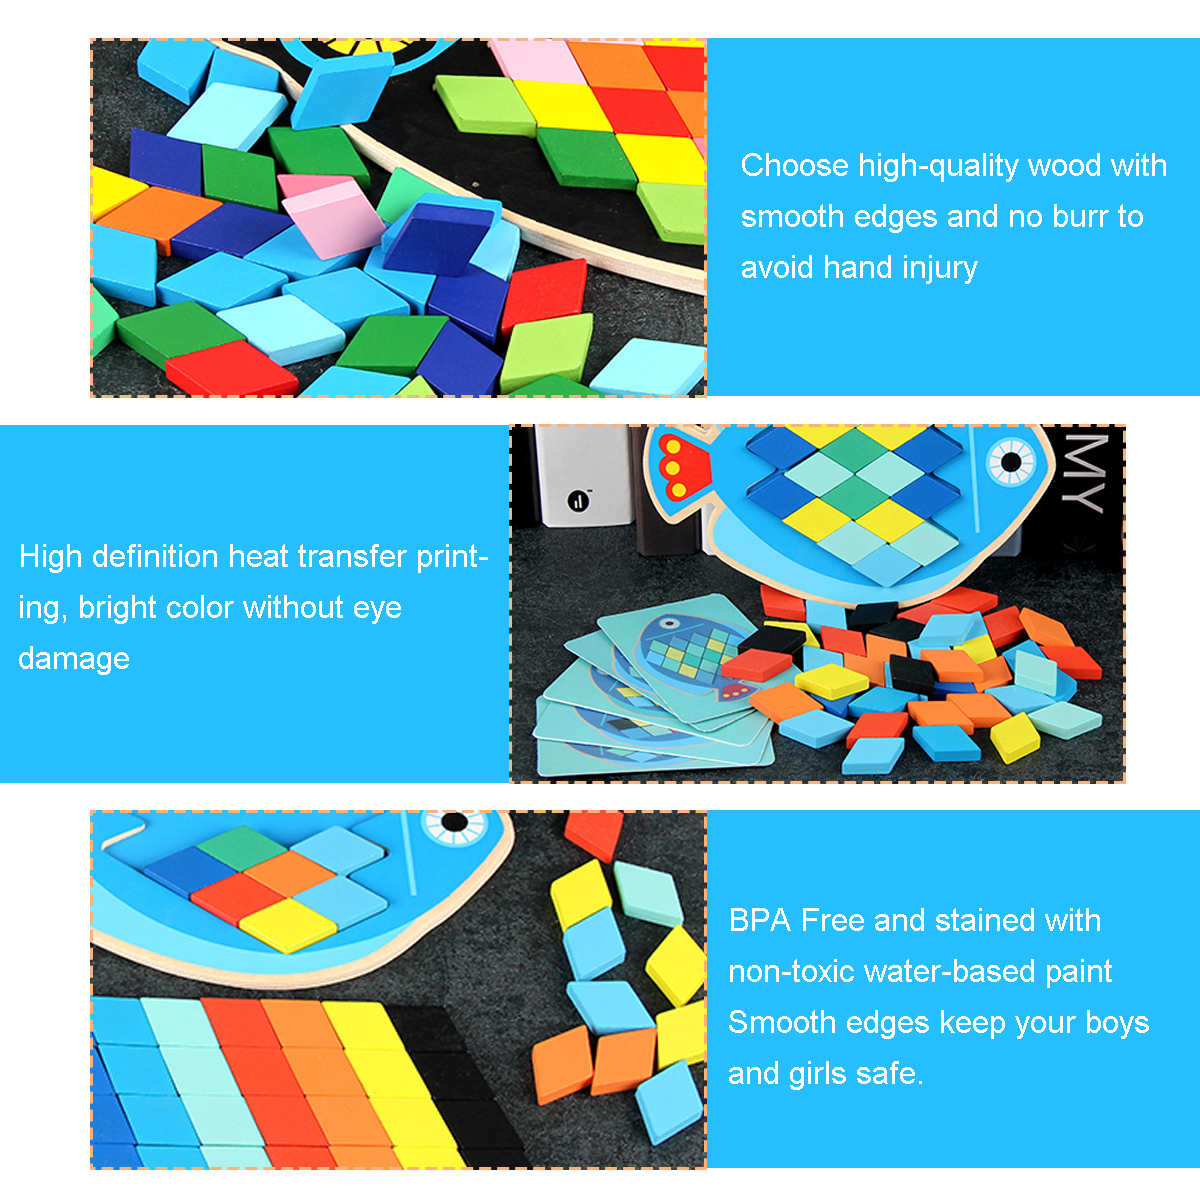 Wood DIY Assembly Jigsaw Puzzle Toy Colors Shapes Cartoon Fish Owl Matching Cards Toy for Children Learning - Photo: 8